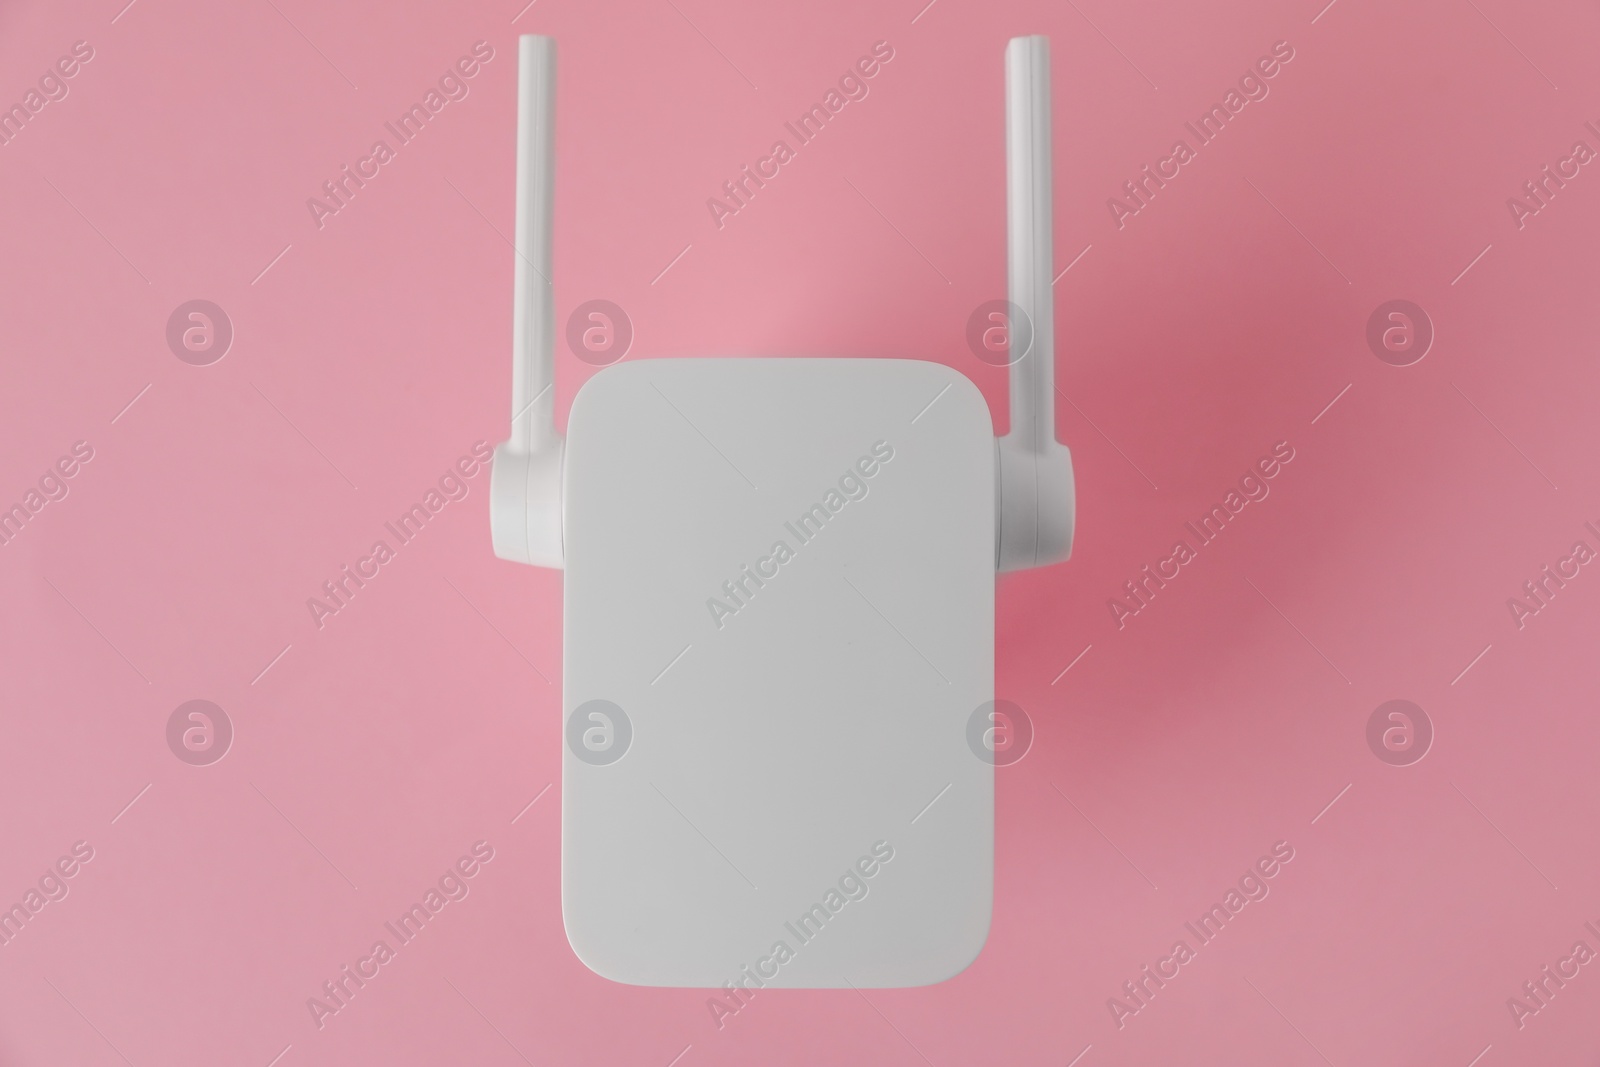 Photo of New modern Wi-Fi repeater on pink background, top view